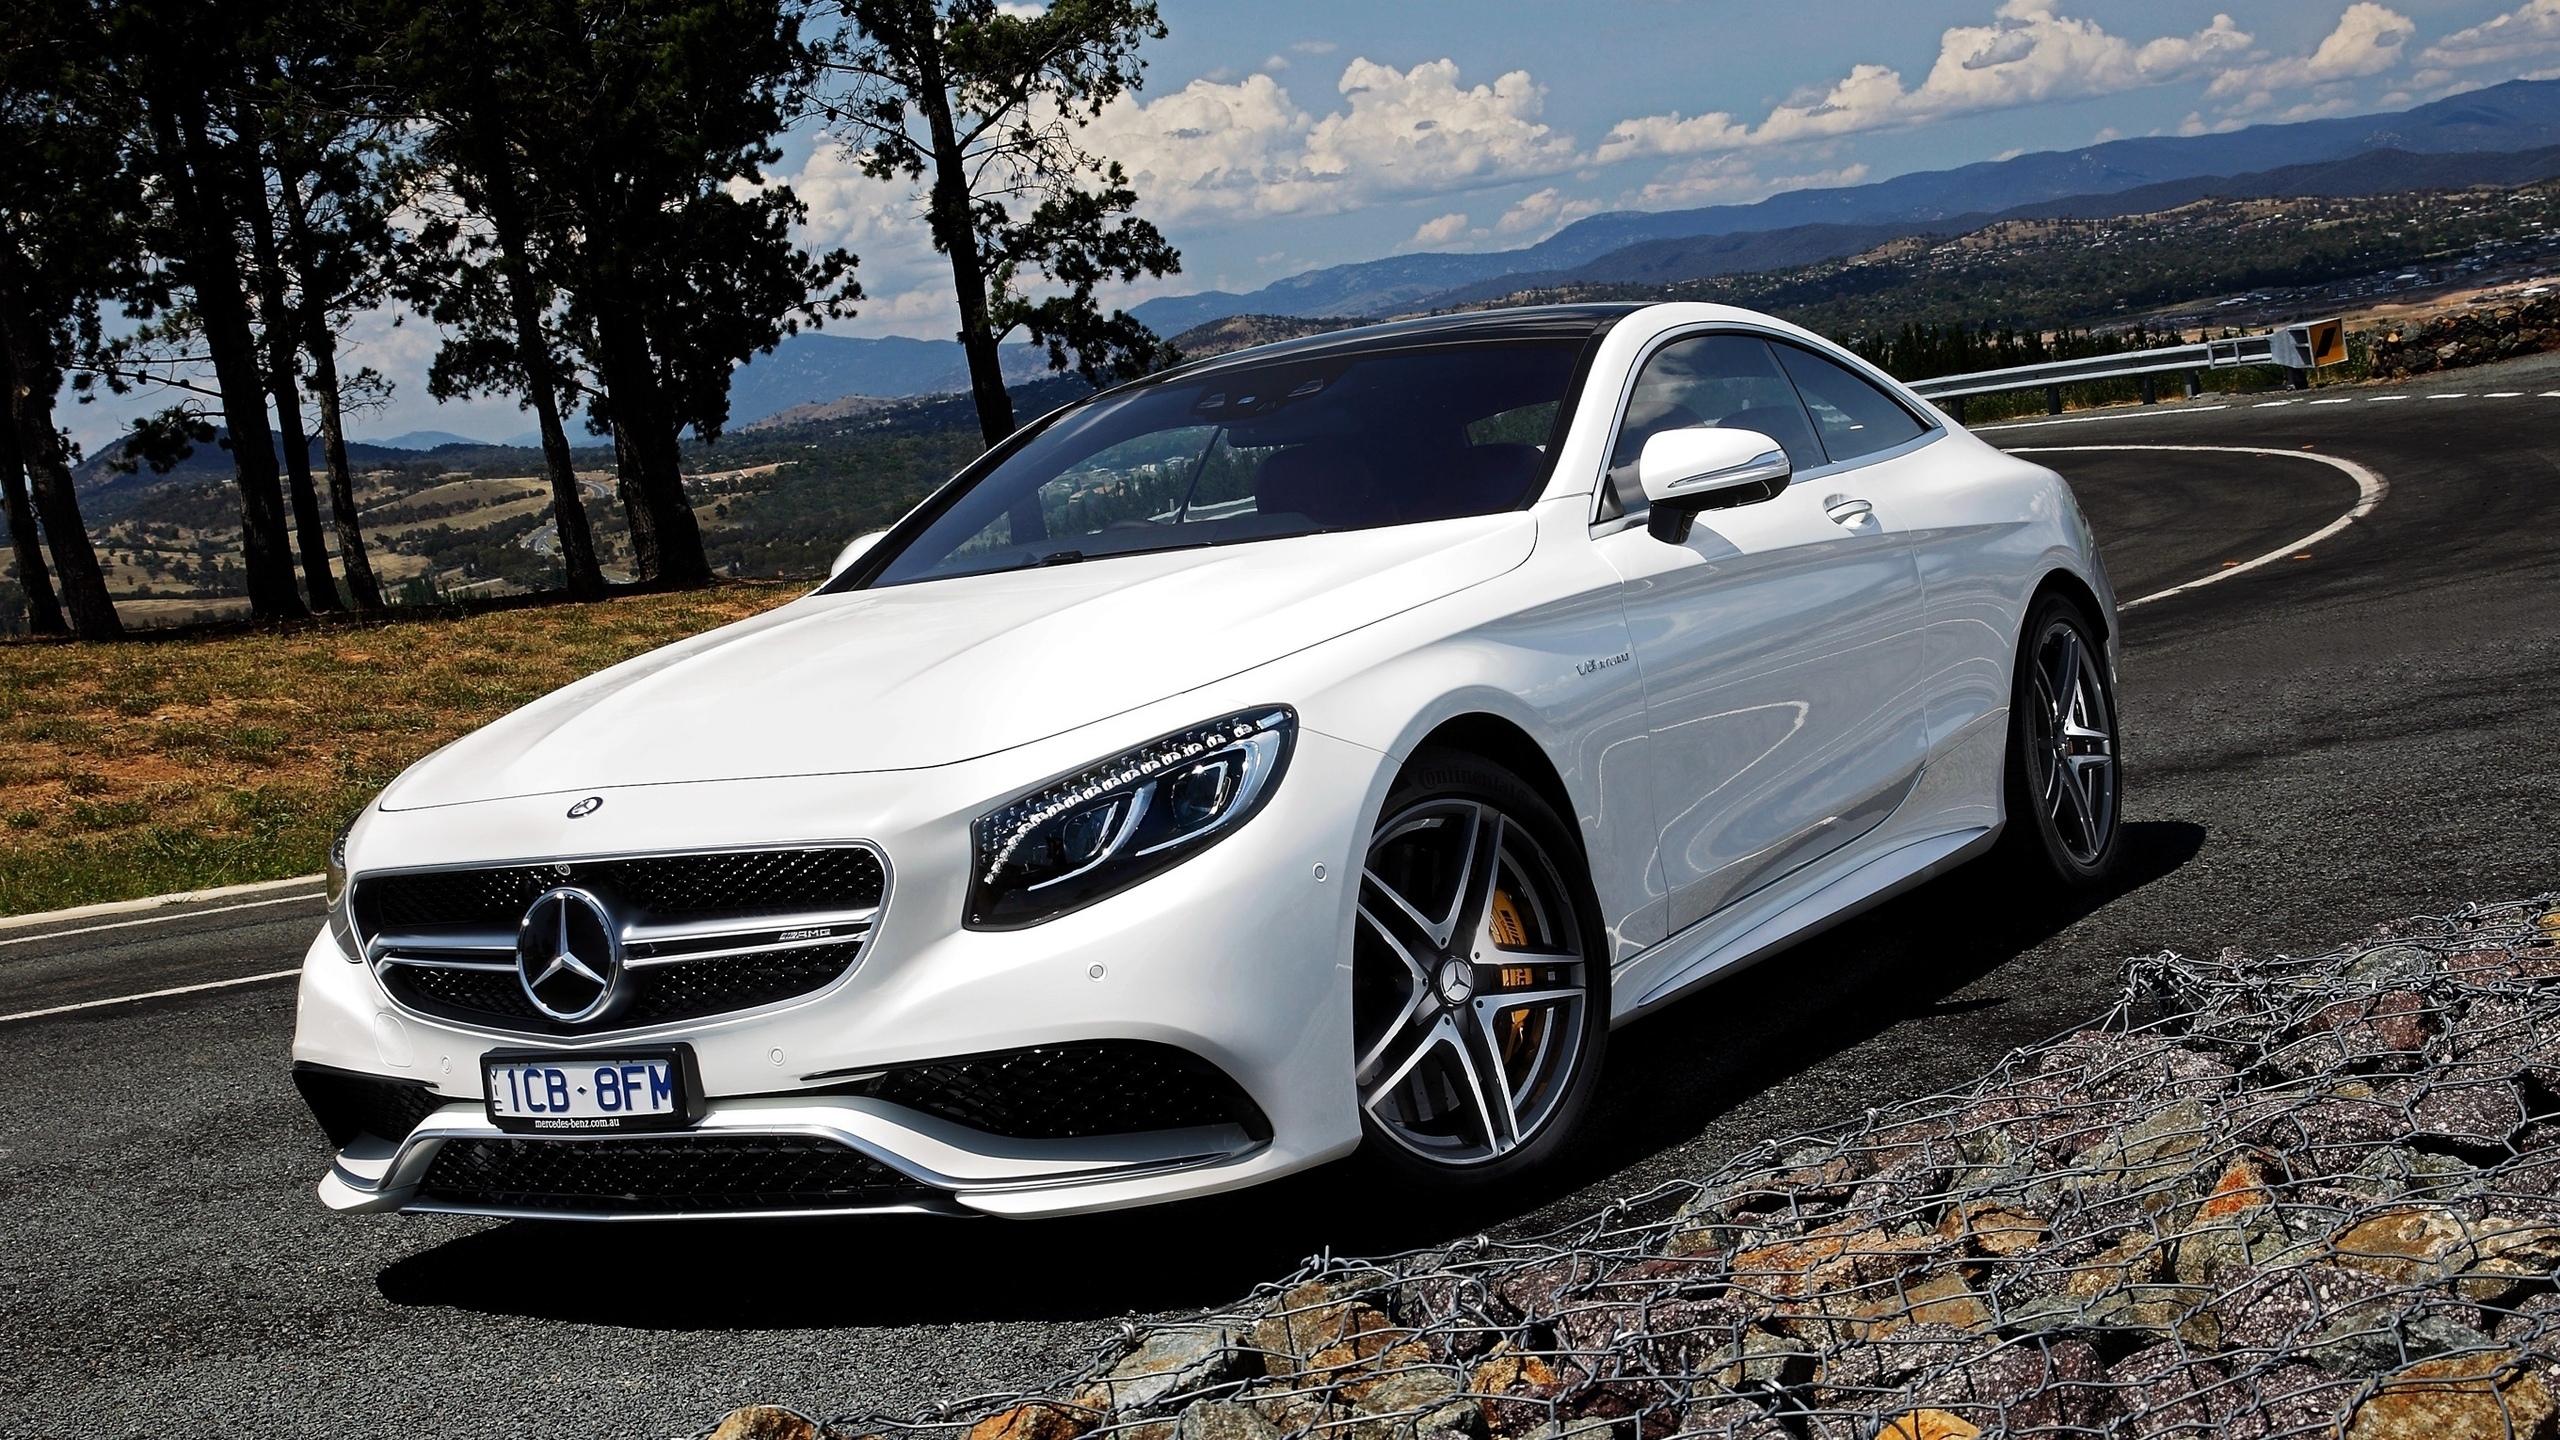 Mercedes Benz S63 AMG for 2560x1440 HDTV resolution